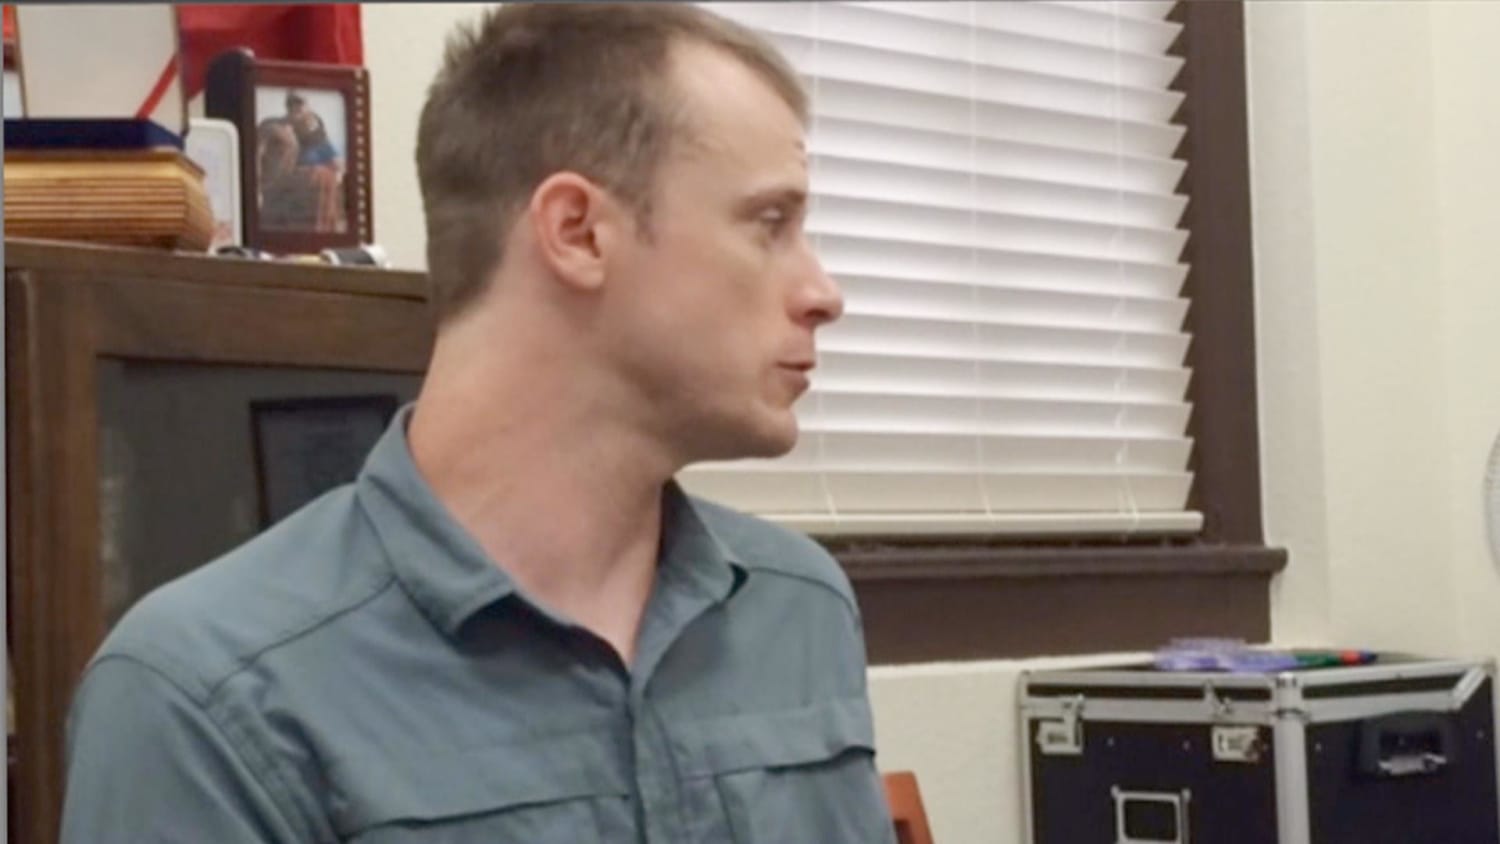 BOWE BERGDAHL Telling His Own Story to Investigators - NBC News.